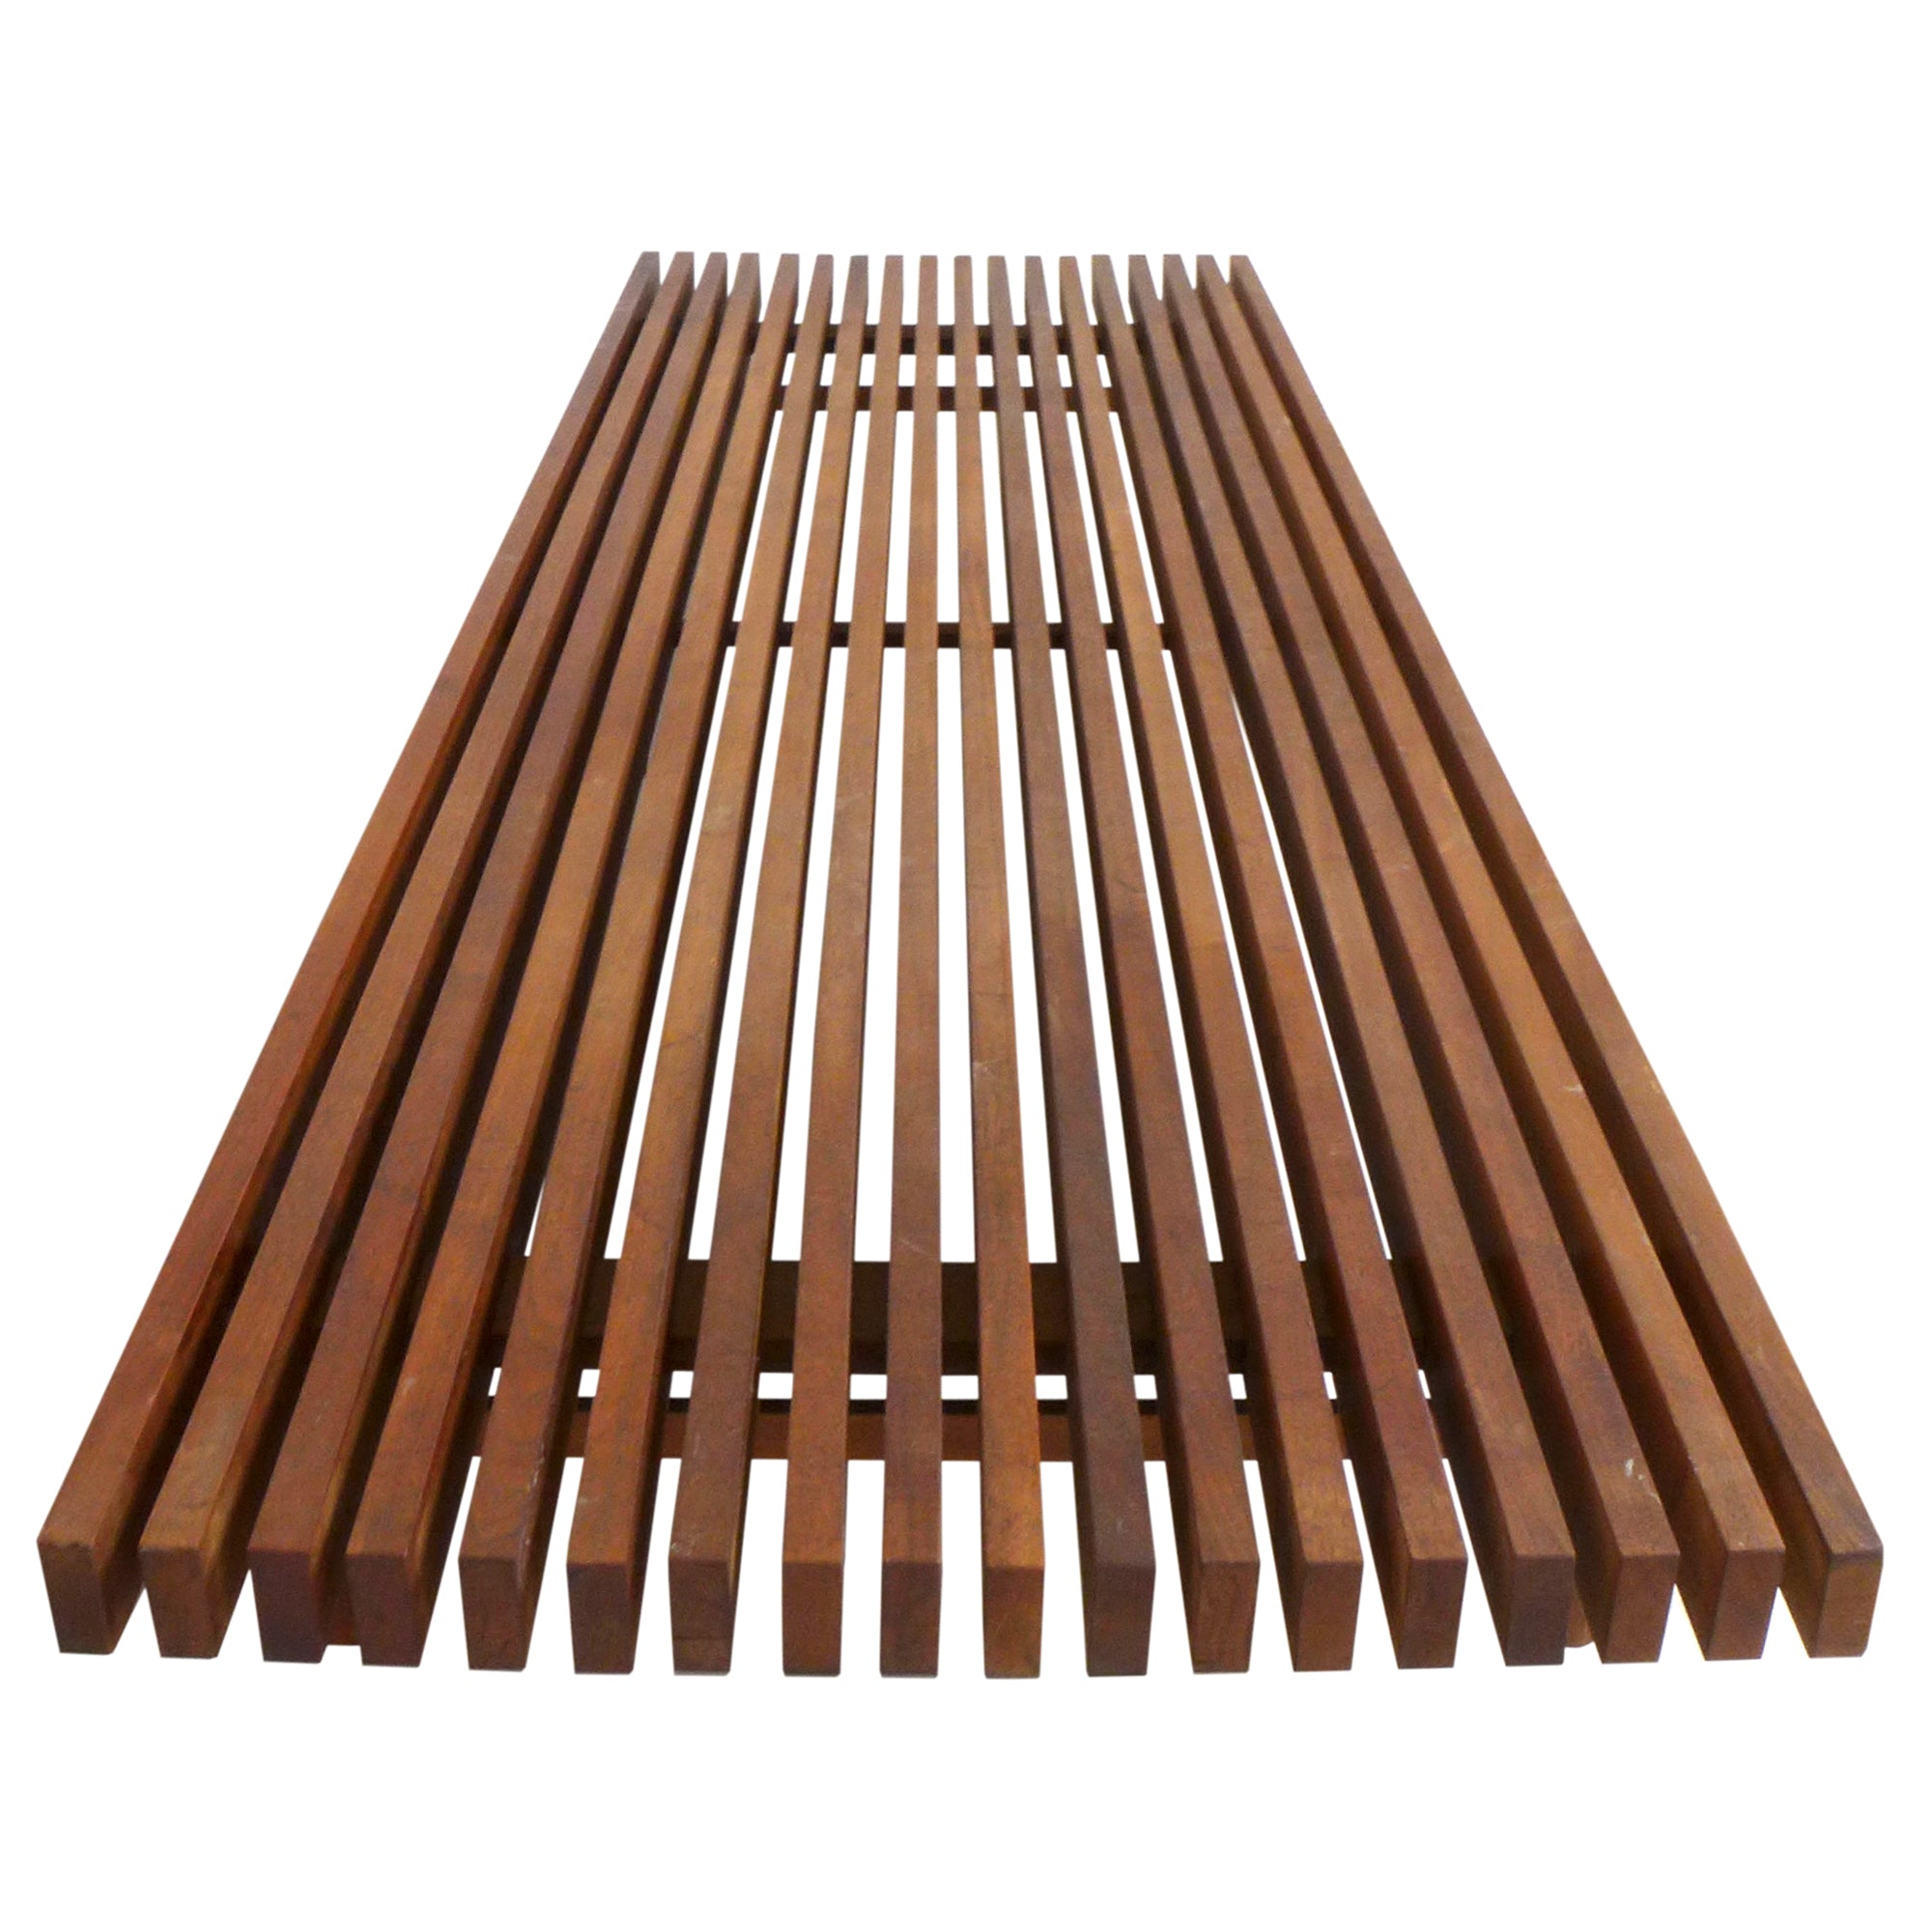 Low Slatted Bench in Teak by William Krisel, AIA